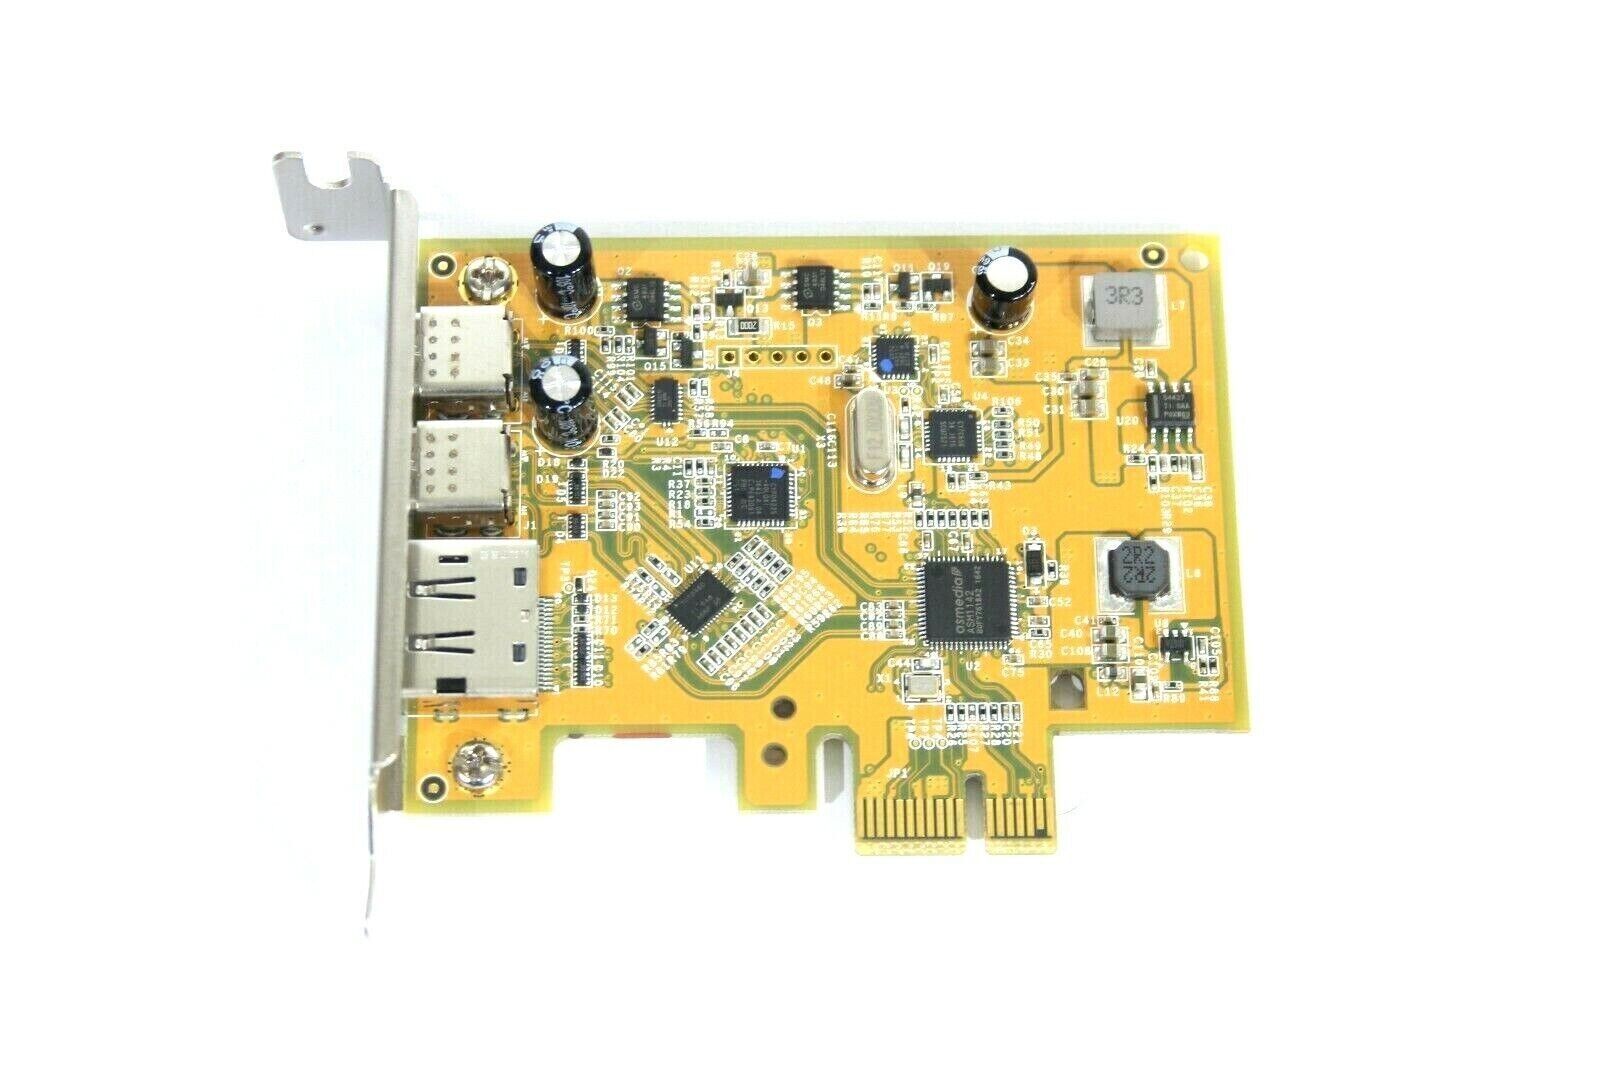 Dell USB 3.1 Gen 2 PCIe Network Adapter Card 2 Type-C 1 Display Port Input 2GT22 - $54.96